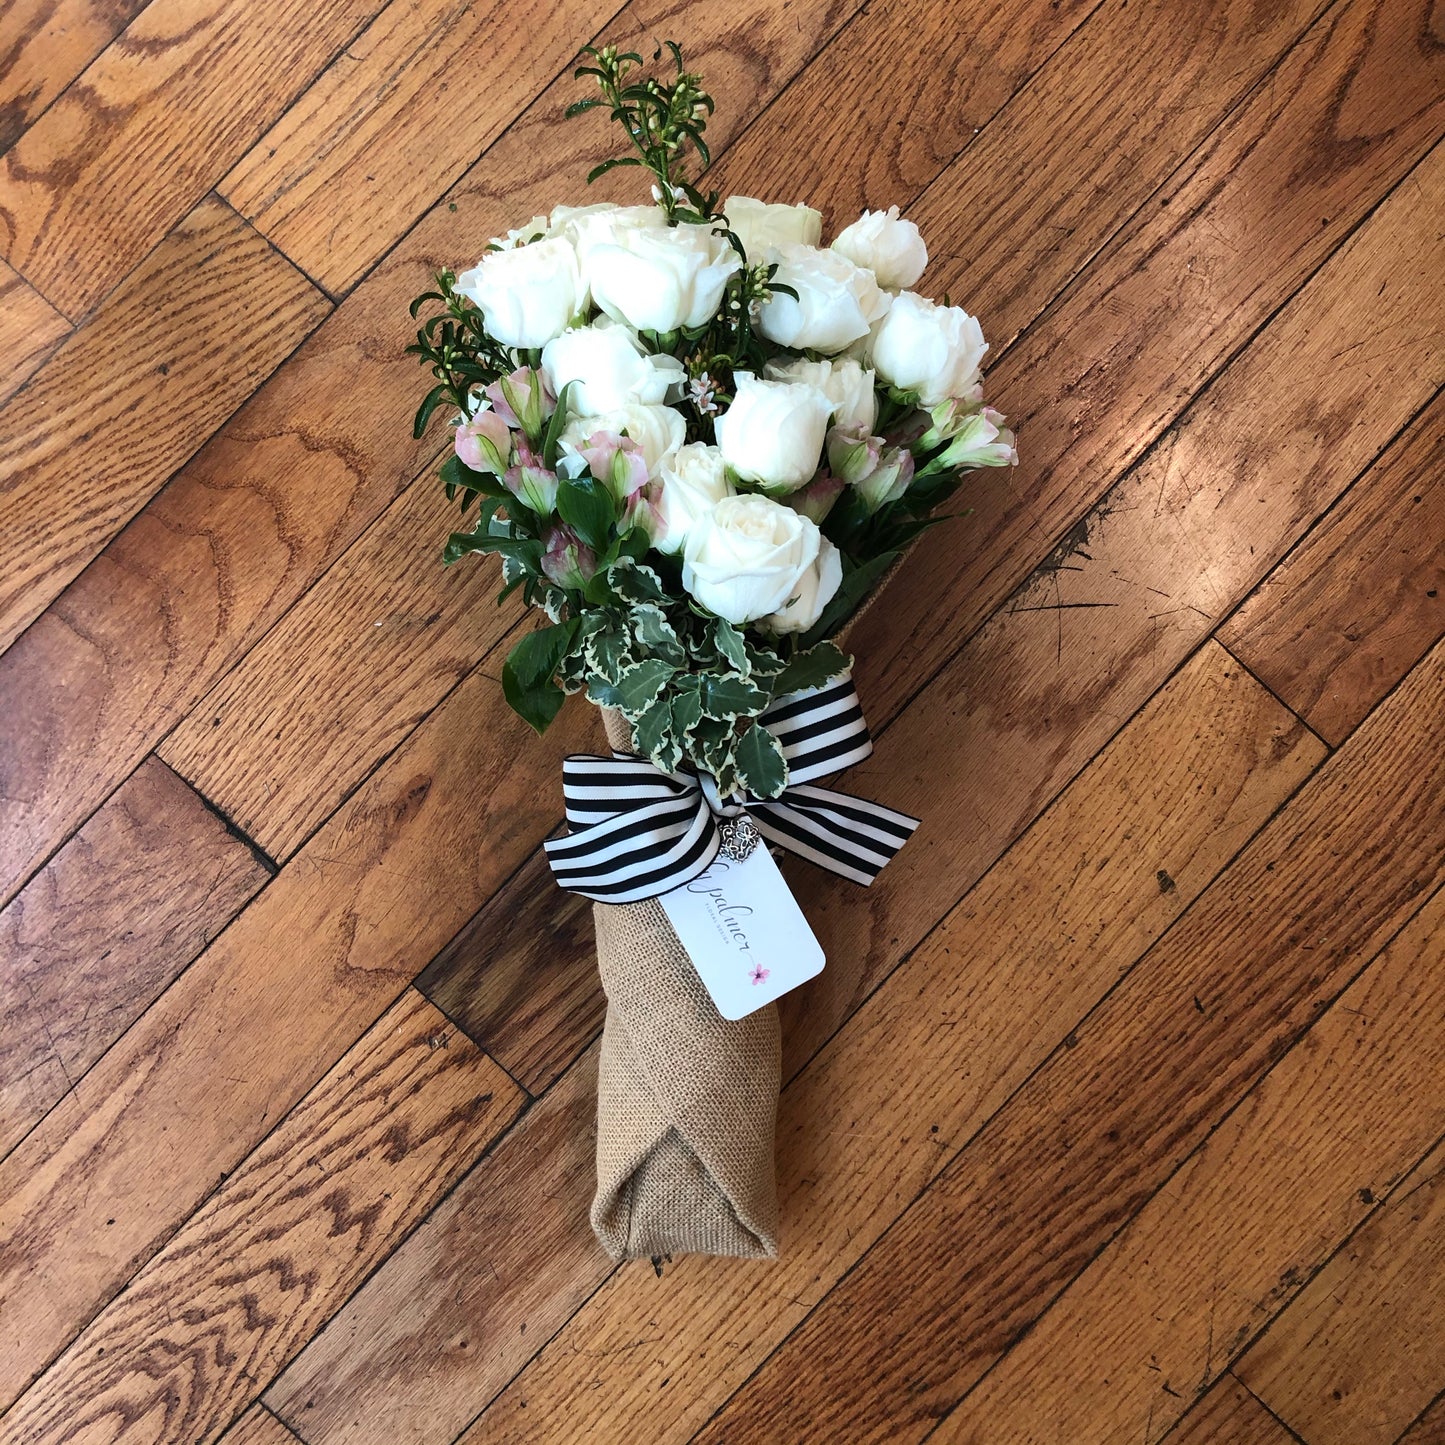 The Lily Wrap from Lily Palmer Flowers  is filled with bunches of roses or seasonal flowers. The perfect gift for birthdays, special moments or just because.